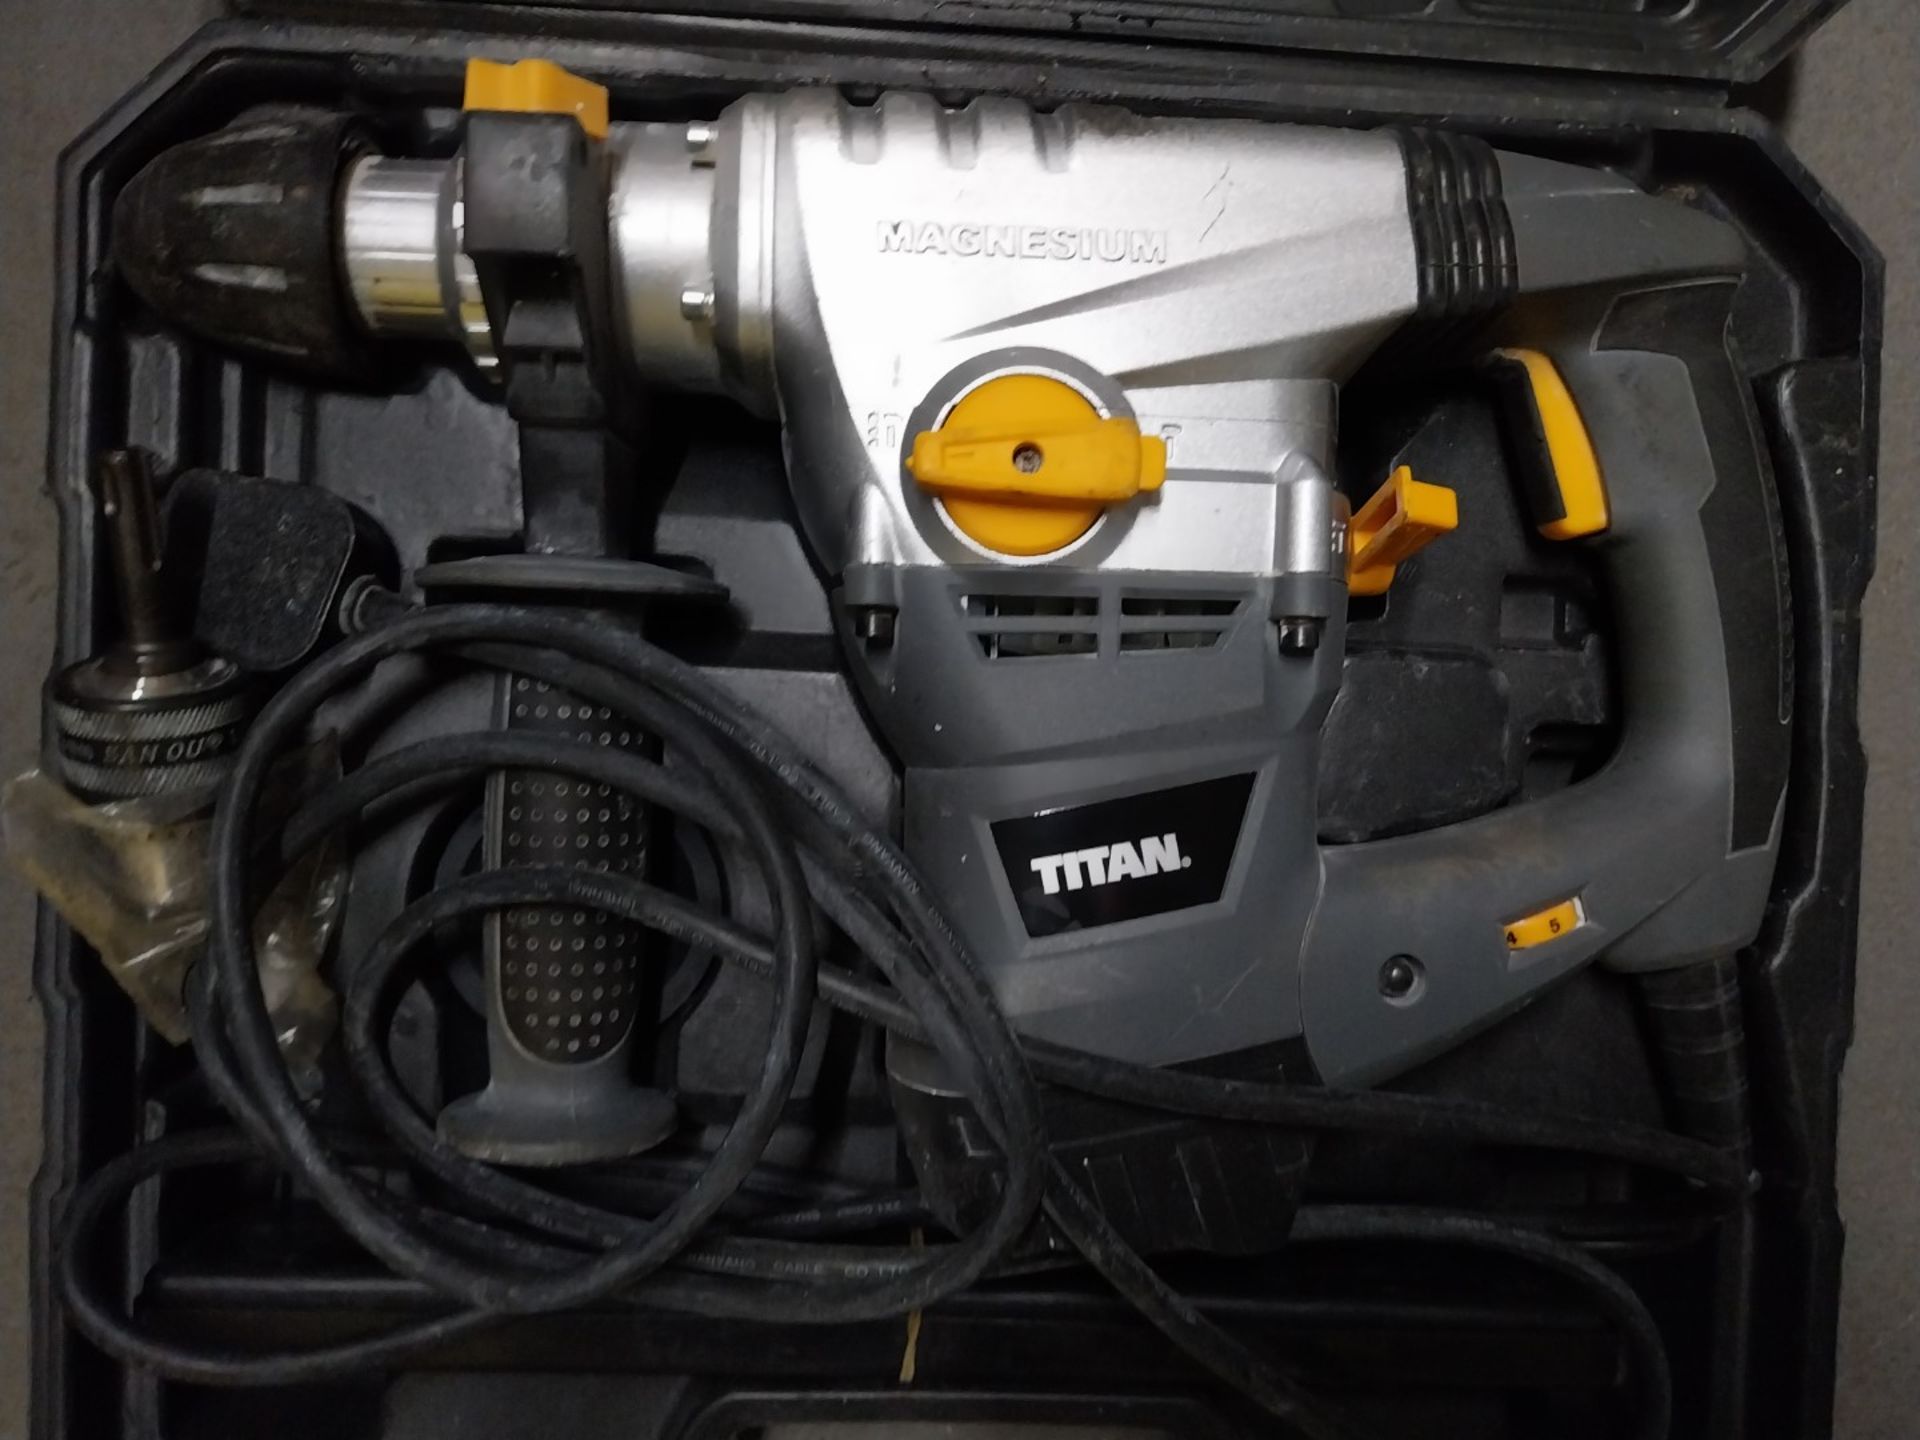 Magnesium Titan Hammer Drill, 240v (located in Leeds) - Image 2 of 2